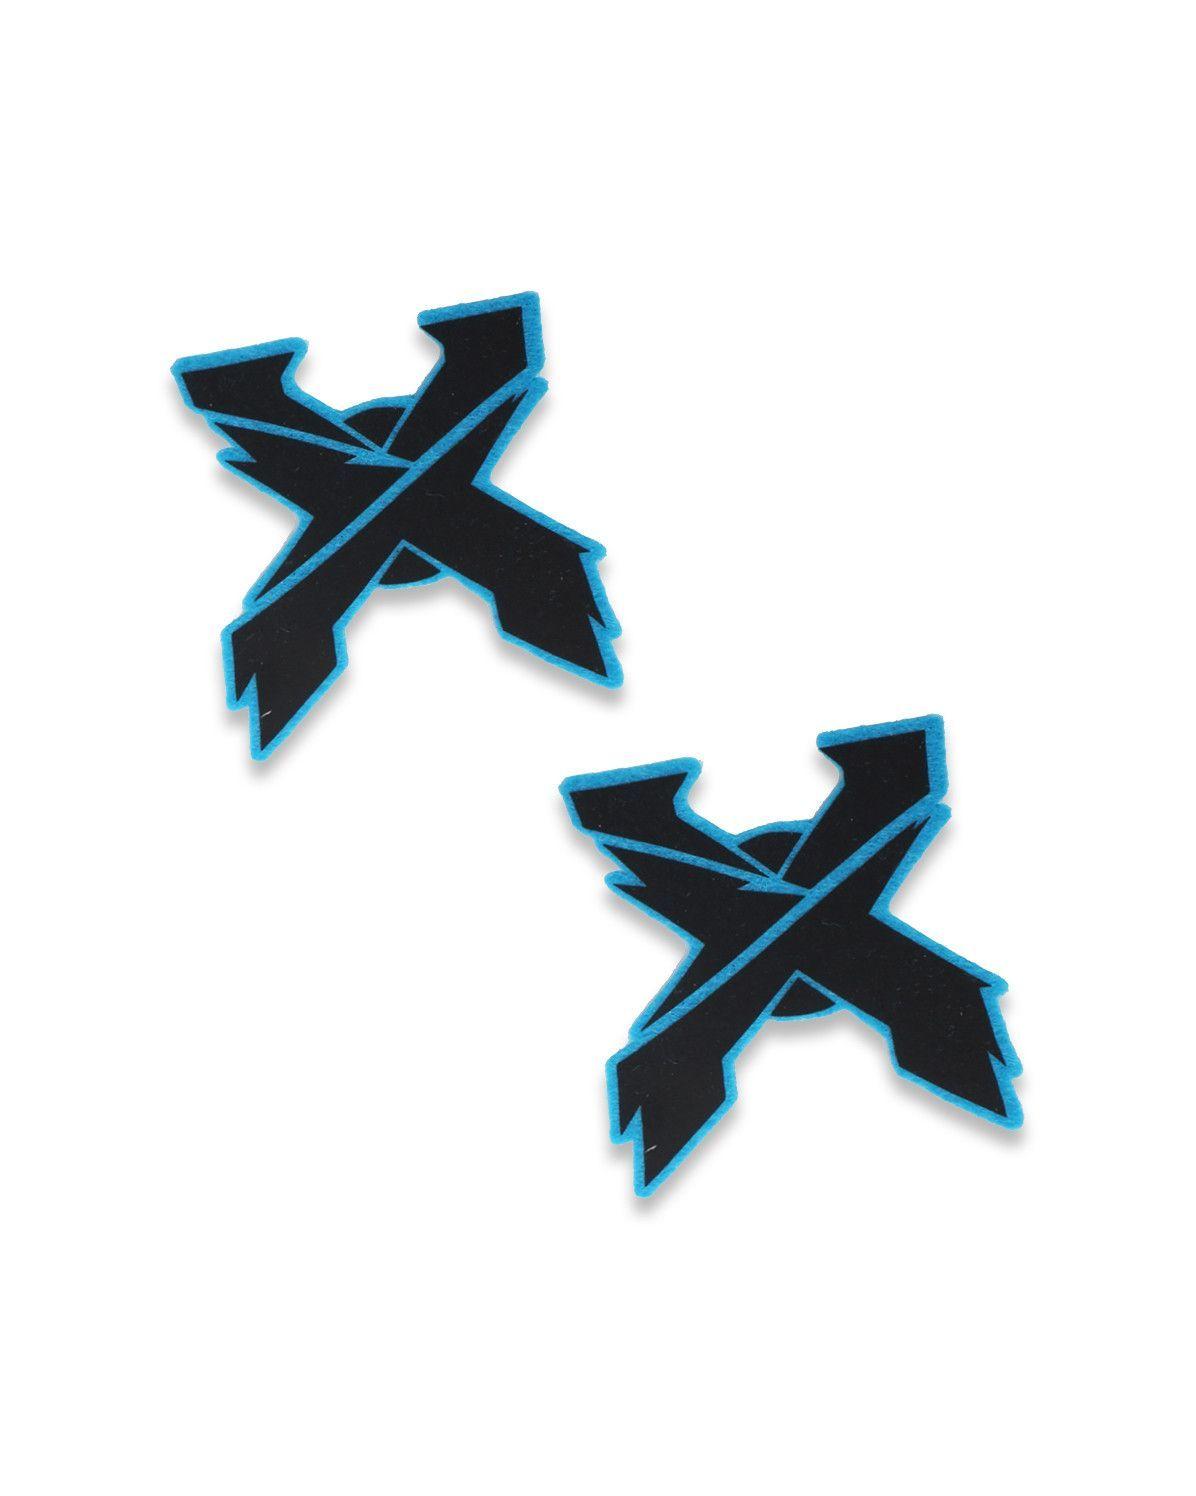 Excision Logo - Excision X Logo Pastease. Rave :). Logos, Store fronts